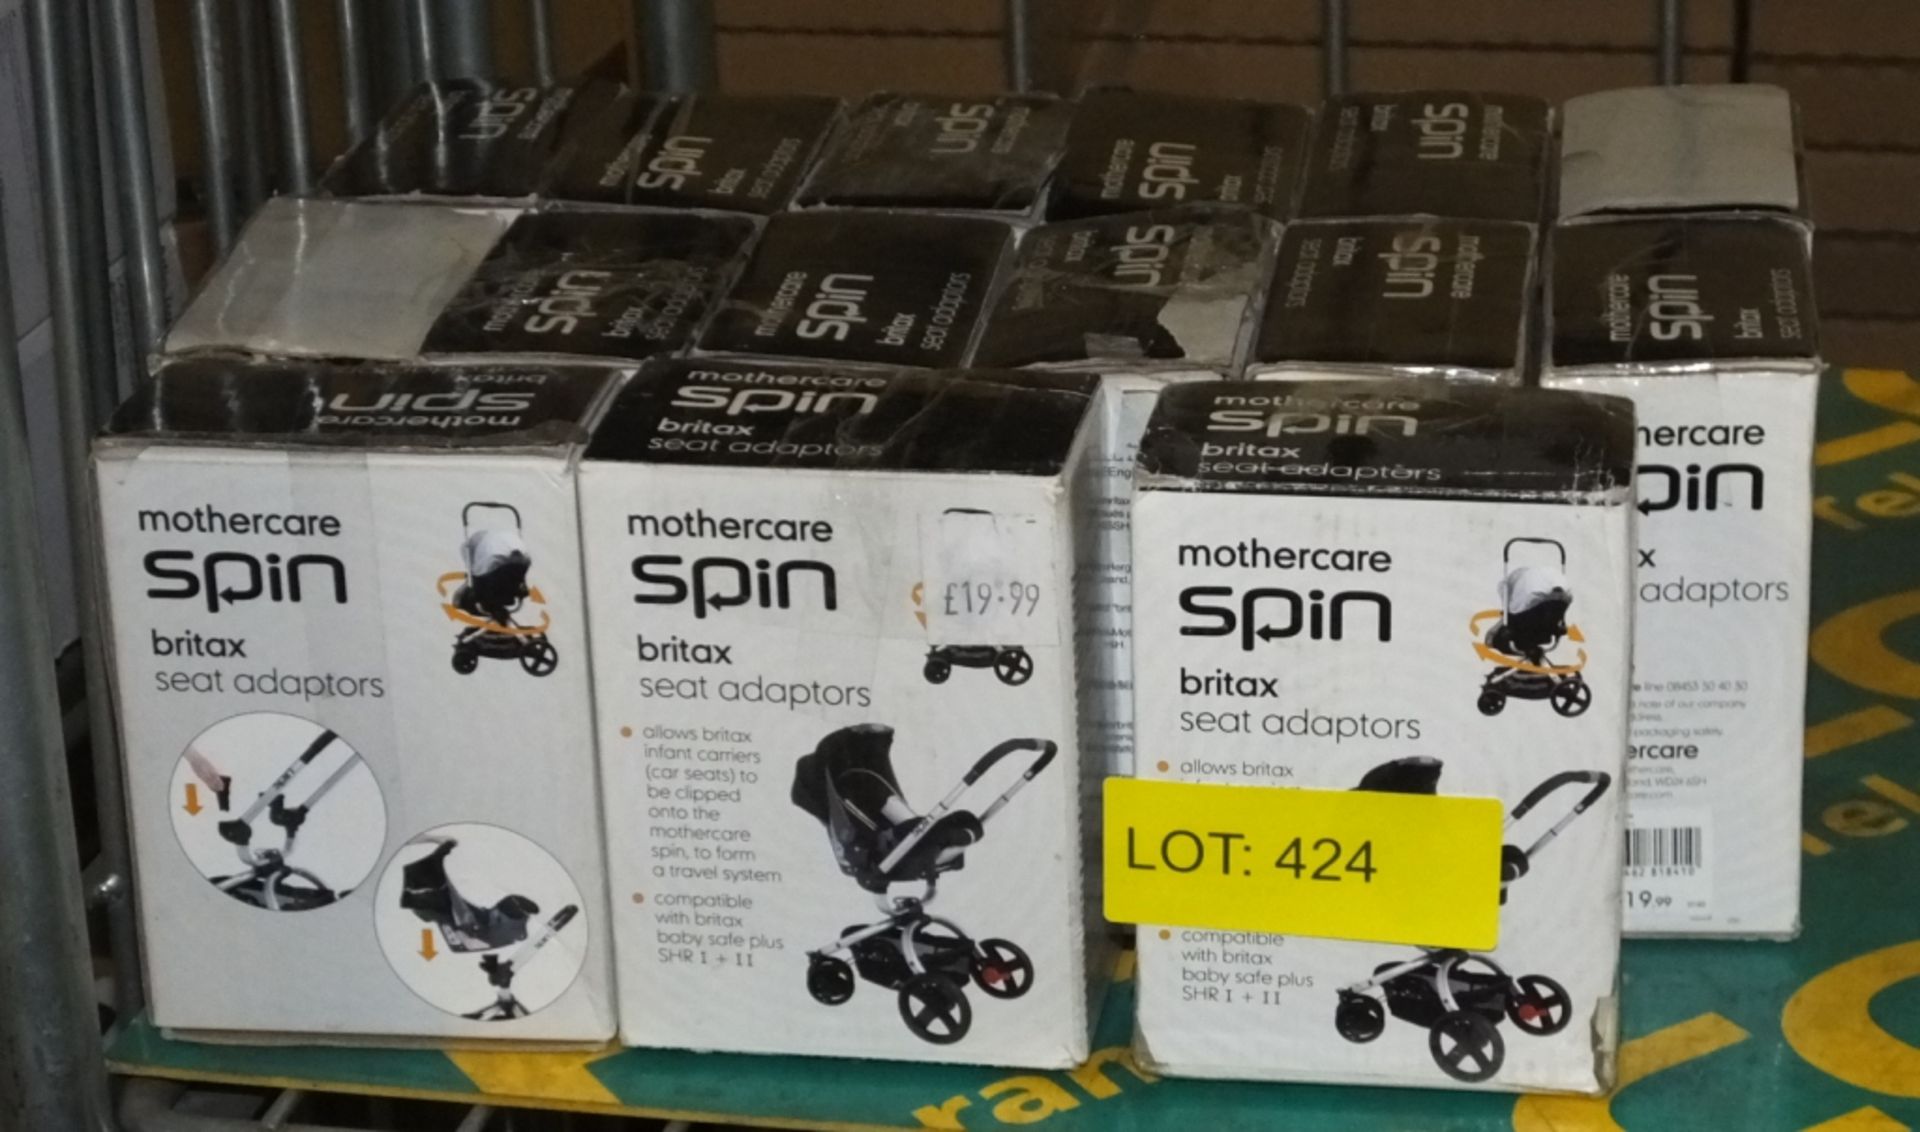 27x Mothercare Spin Britax Seat Adapters - Image 2 of 3